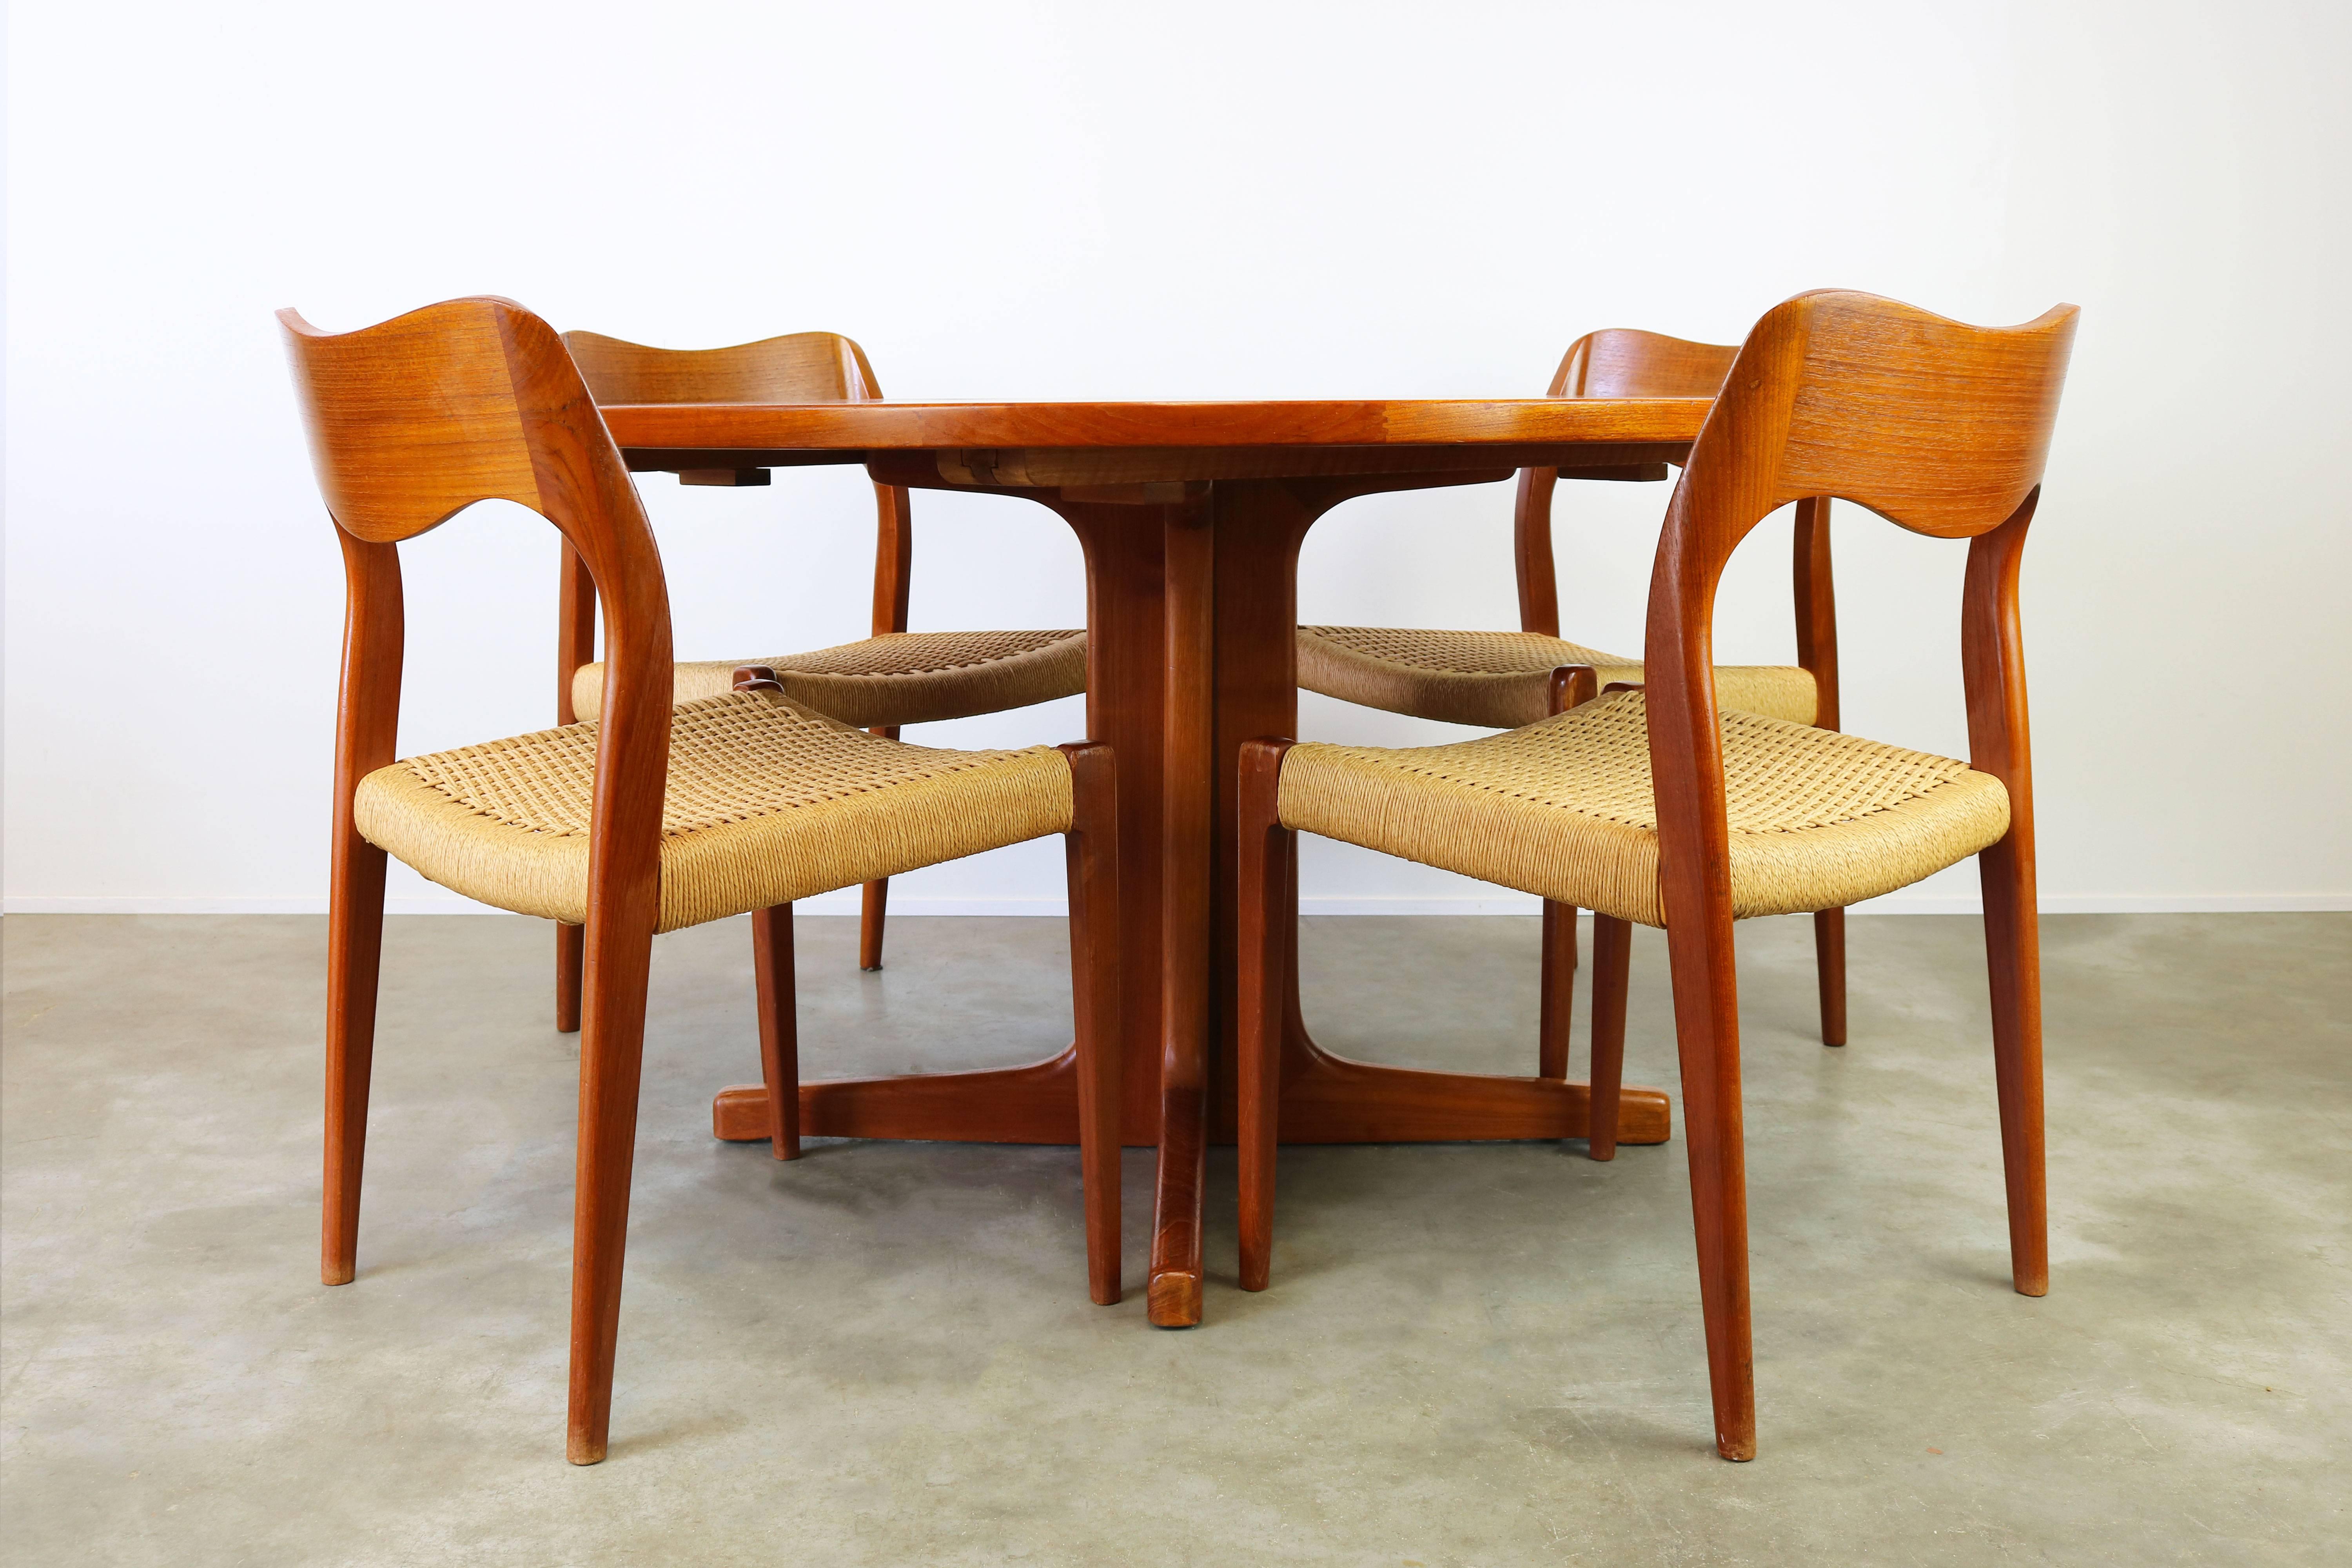 Mid-20th Century Danish Dining Room Set Model 71 Teak Papercord by Niels Otto Moller 1950 Brown